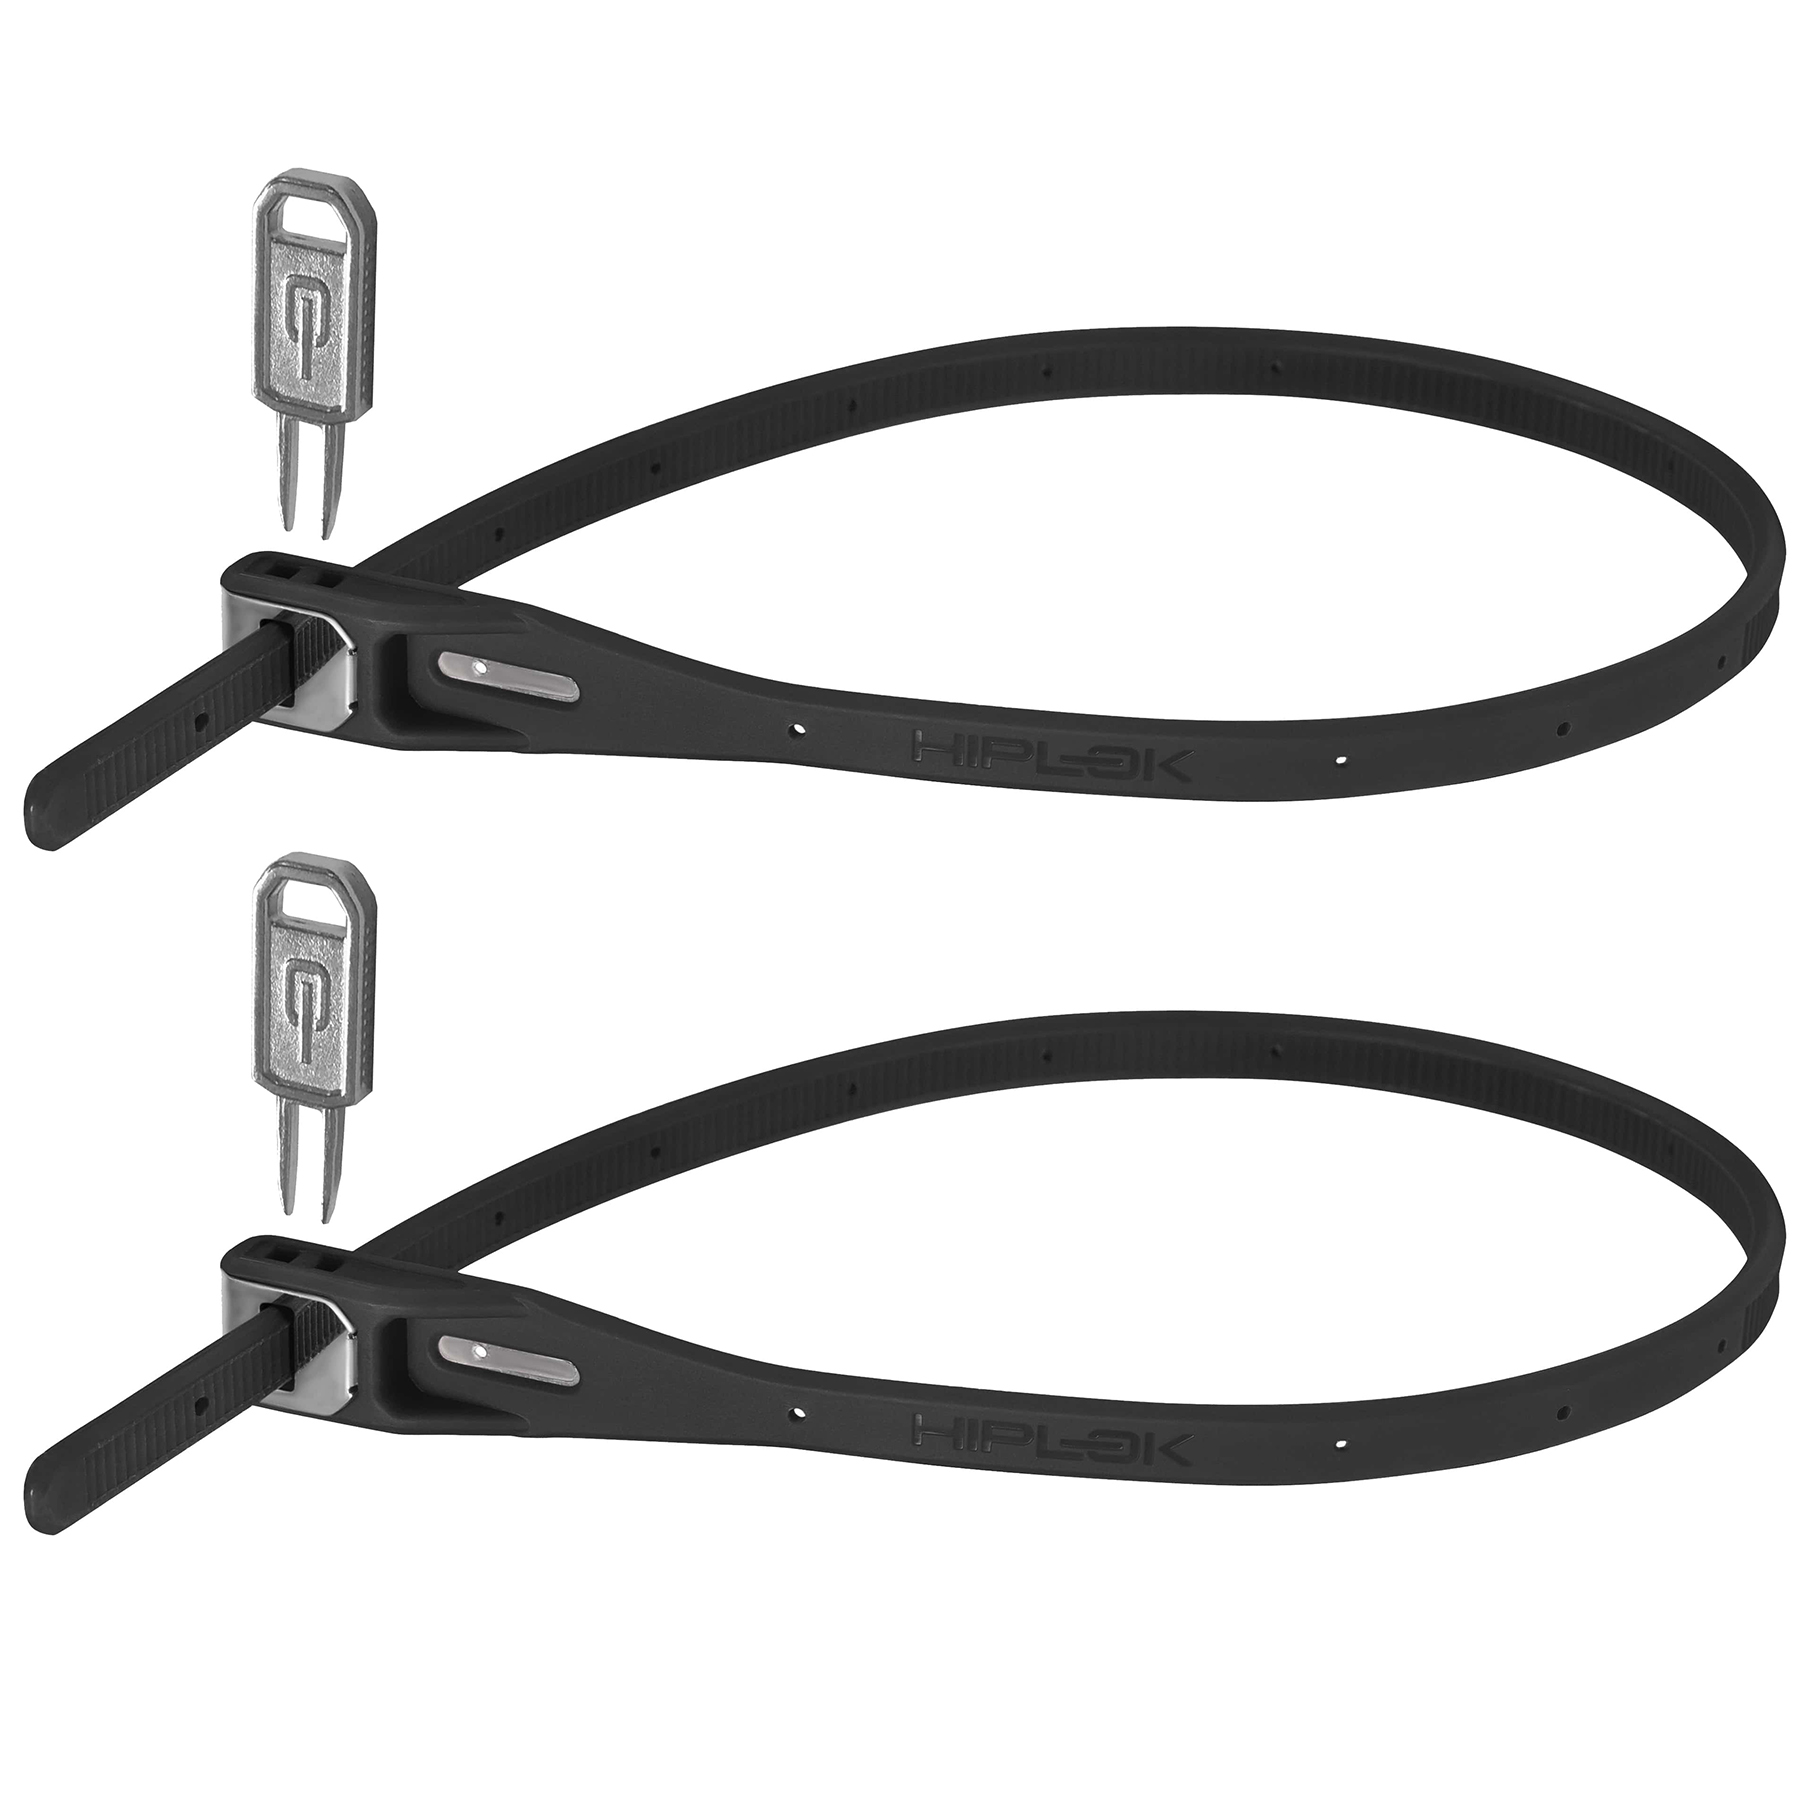 Picture of Hiplok Z-Lok Cable Lock - 2 pieces - all black